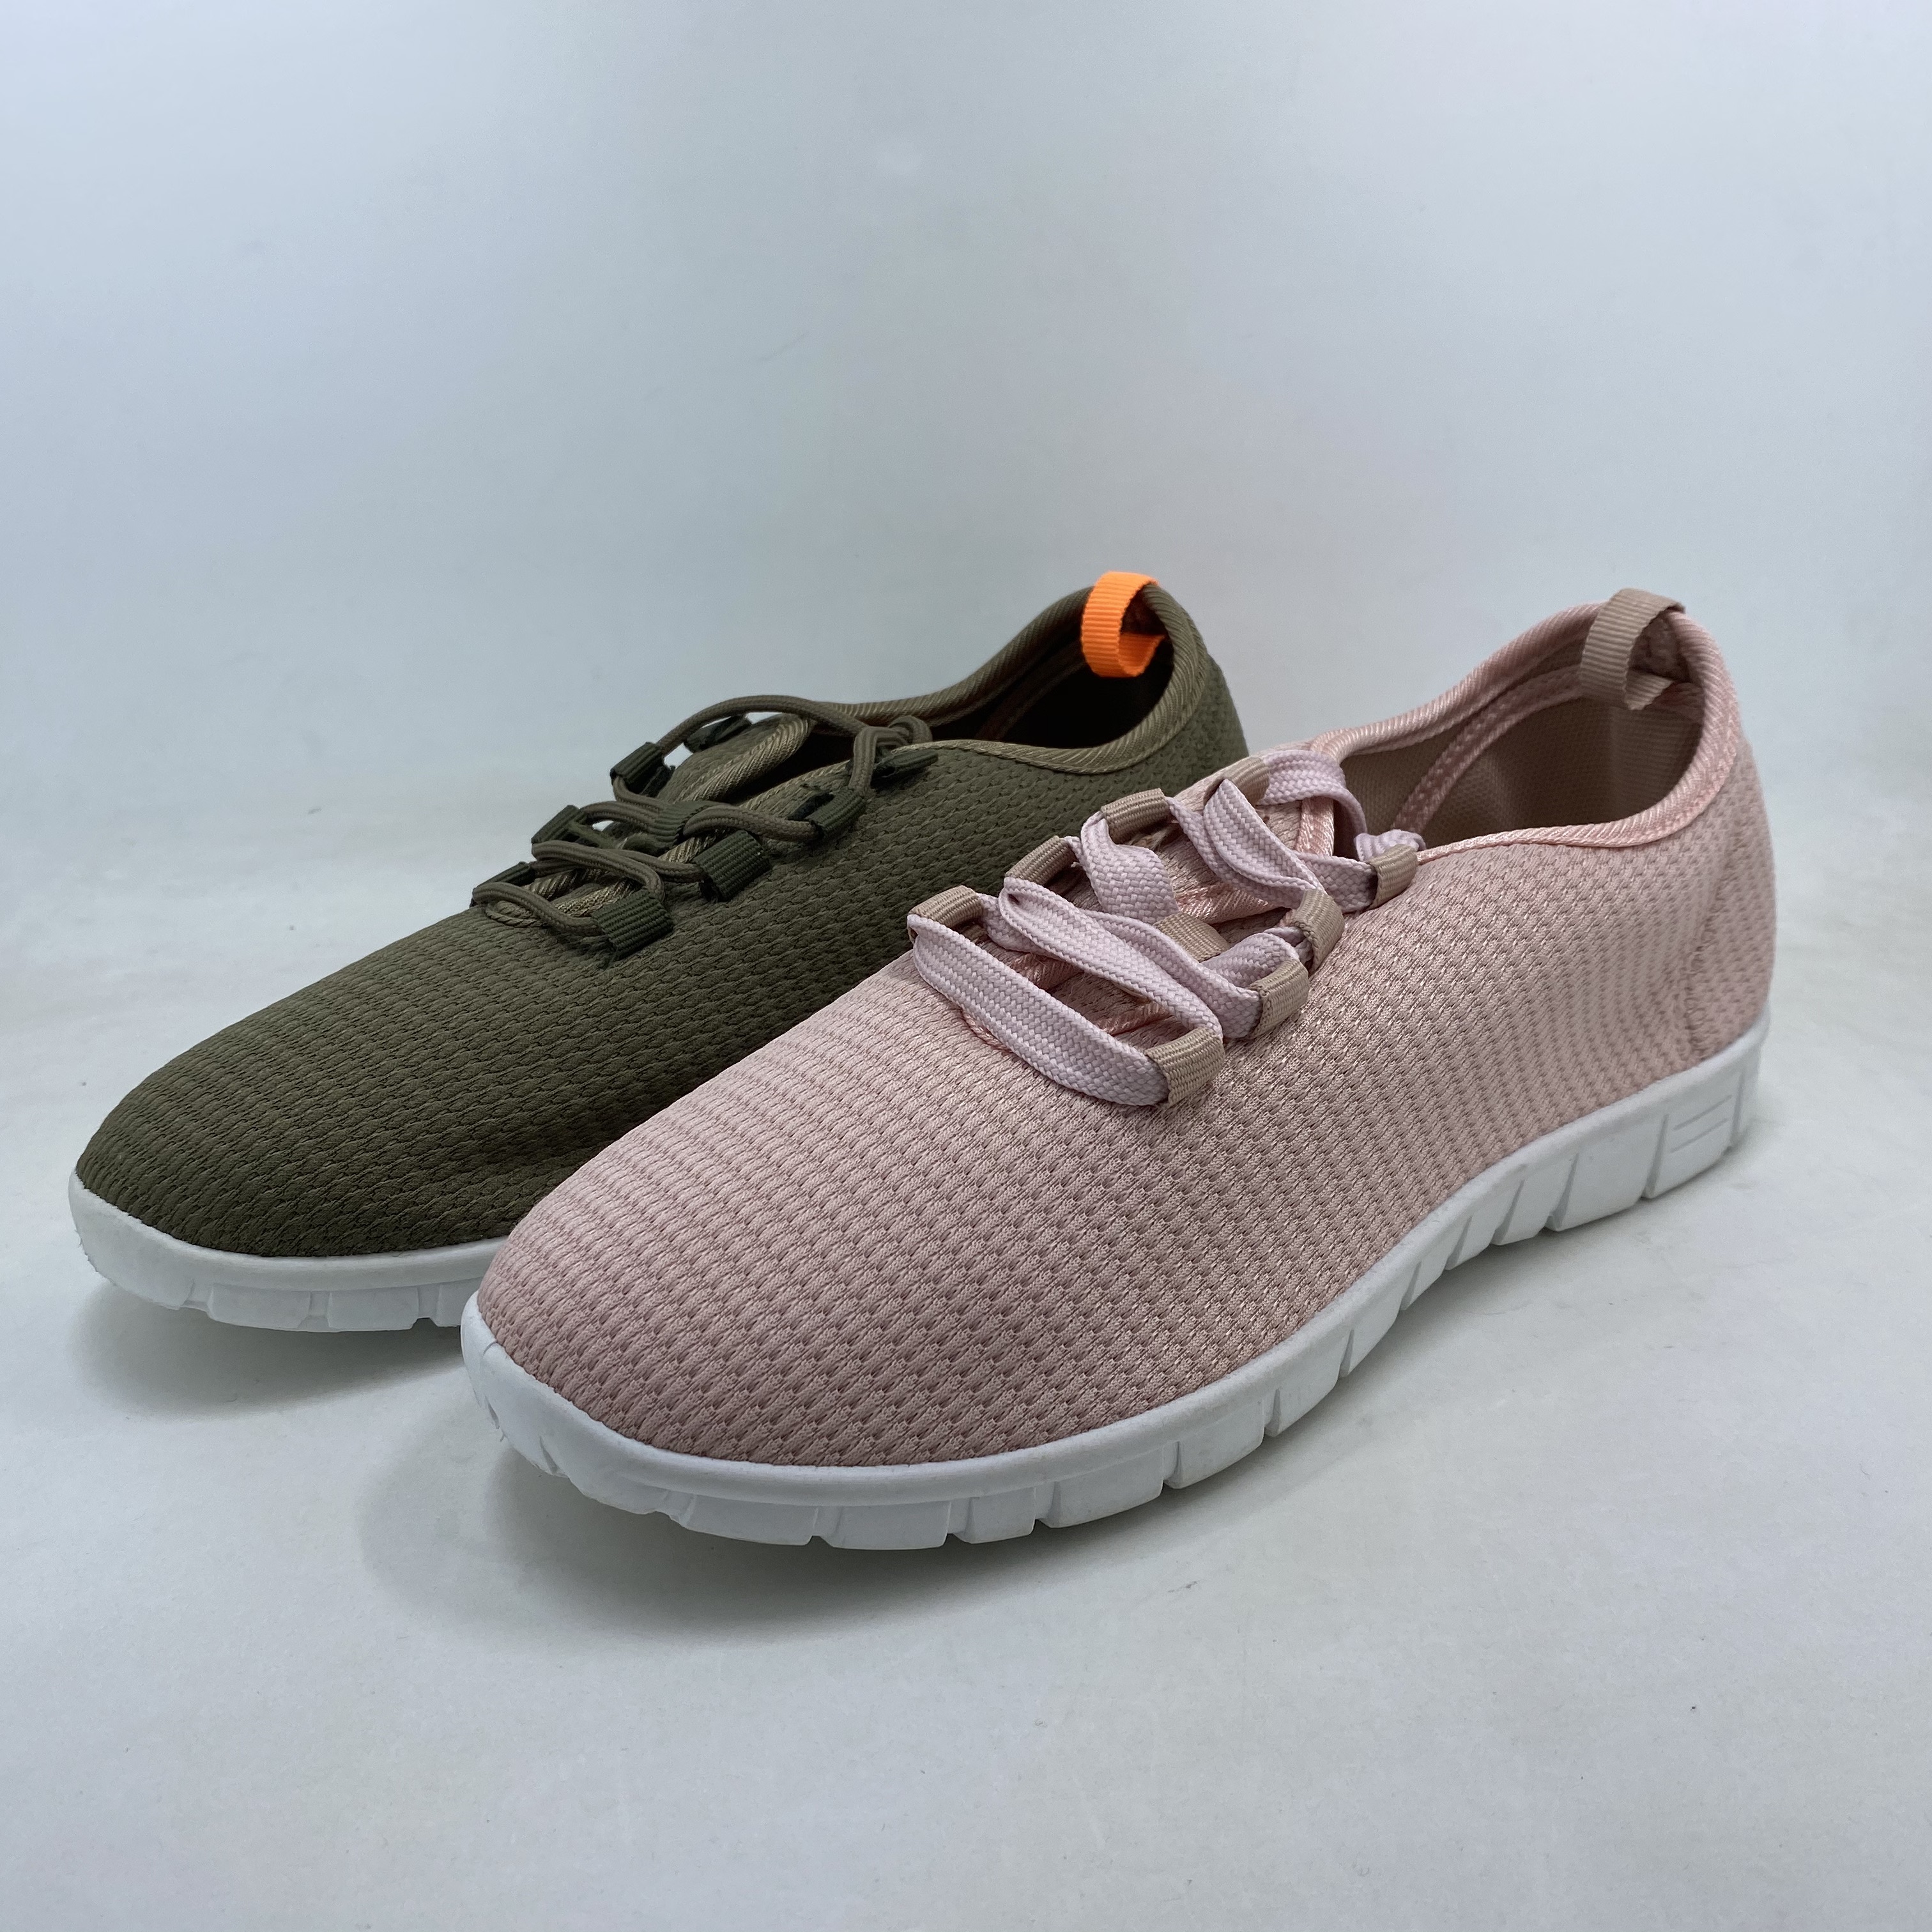 Womens Walking Tennis Shoes - Slip On Memory Foam Lightweight Casual Sneakers for Gym Travel Work 